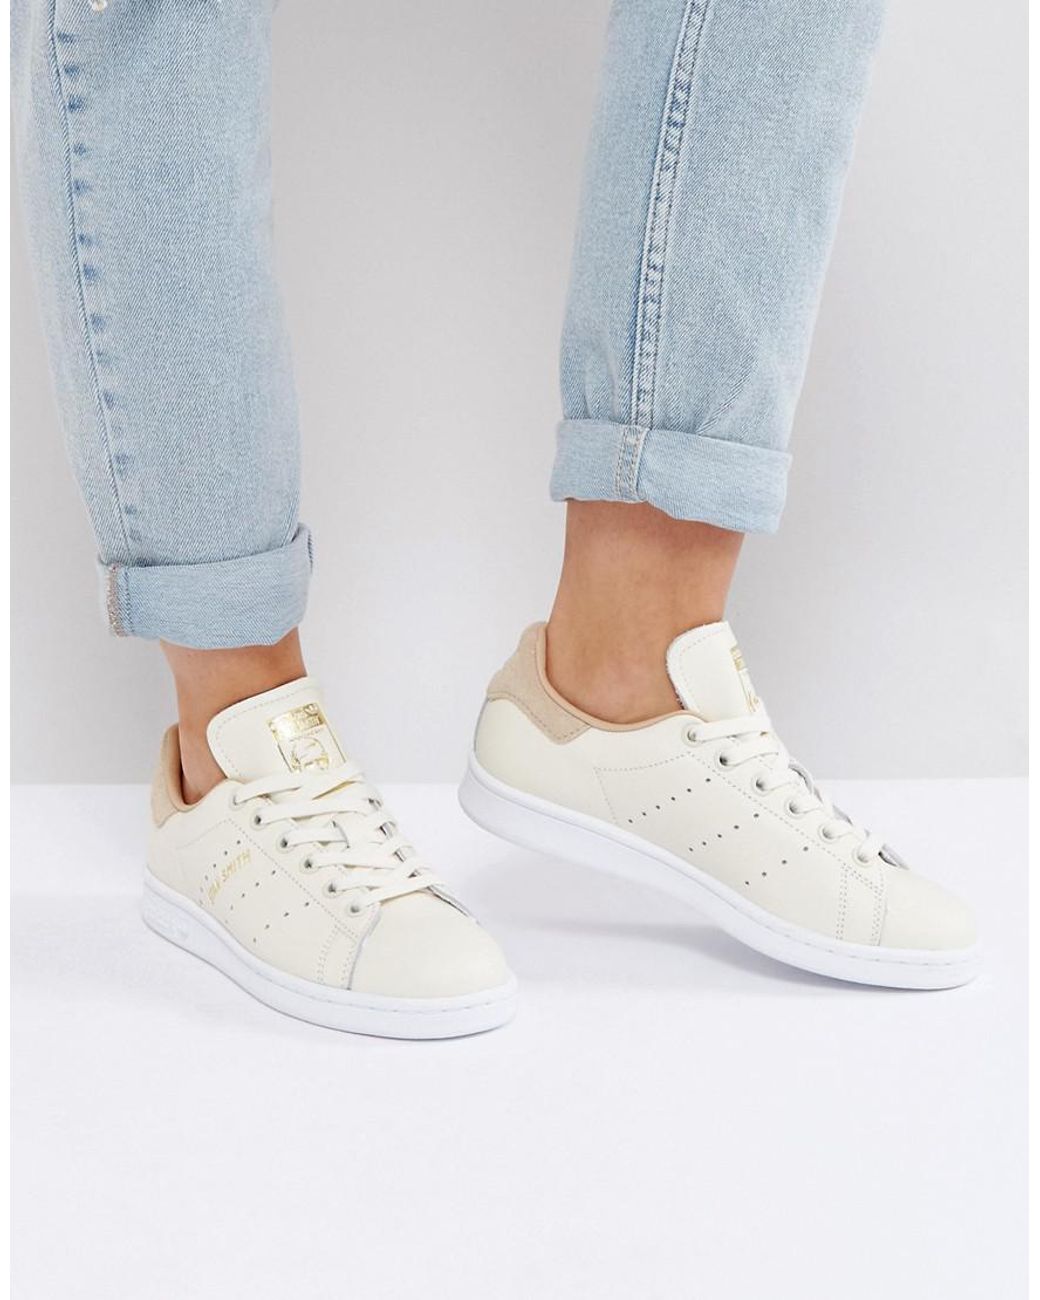 adidas Originals Off White Stan Smith Sneakers Tan | Lyst